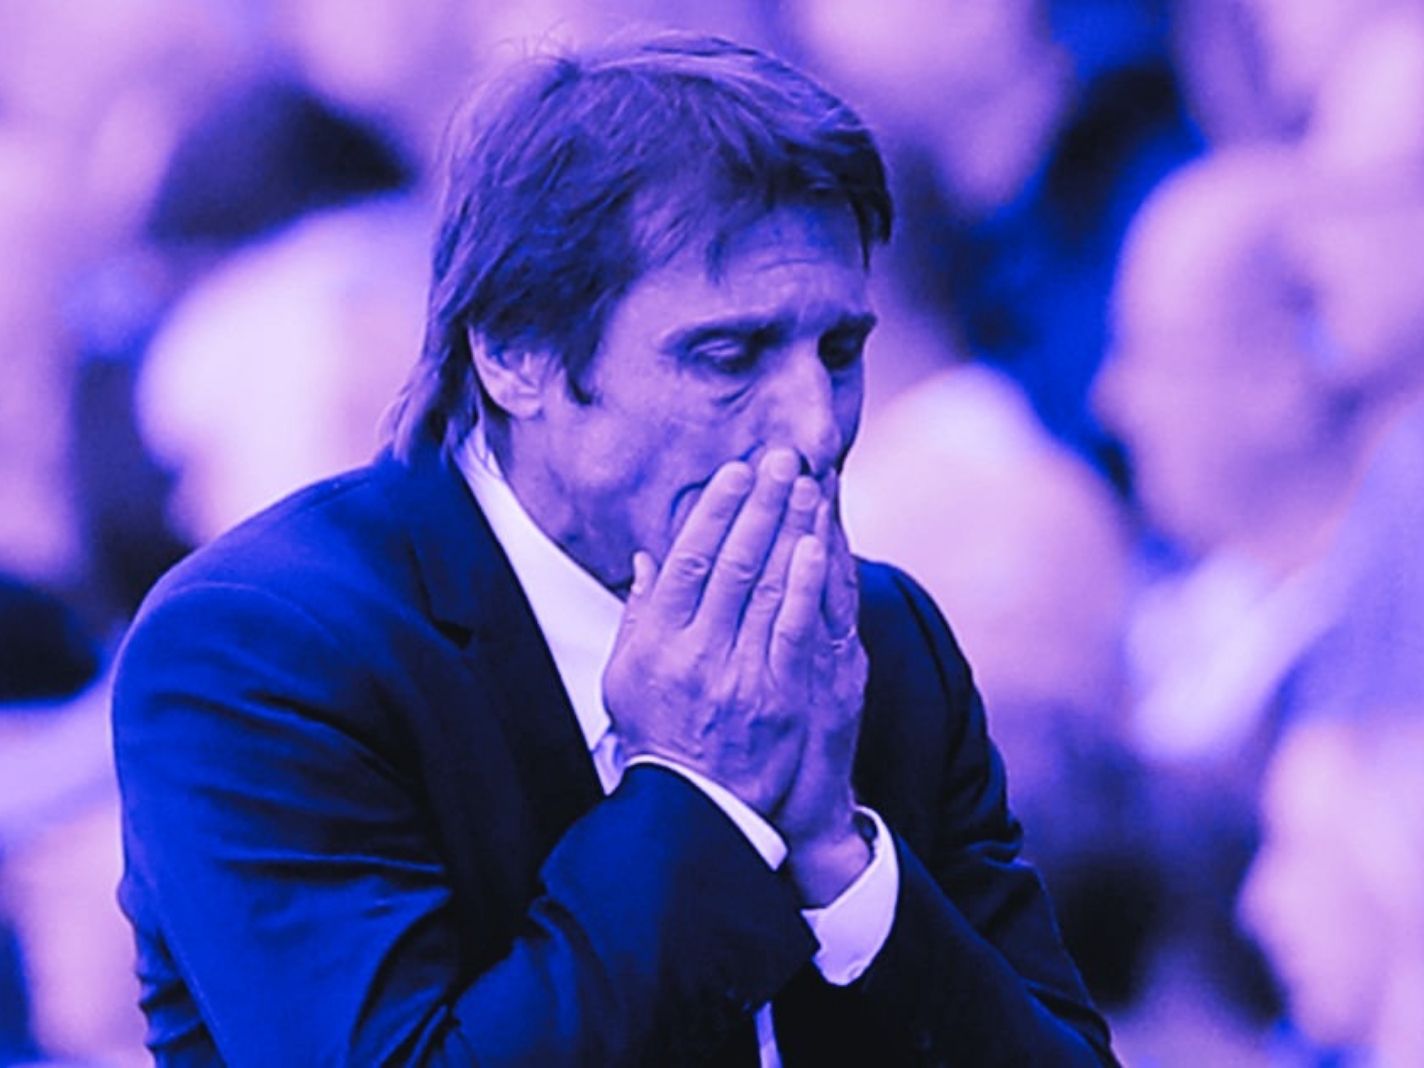 New Spurs boss Antonio Conte caught reposting famous Arsenal chant on social media